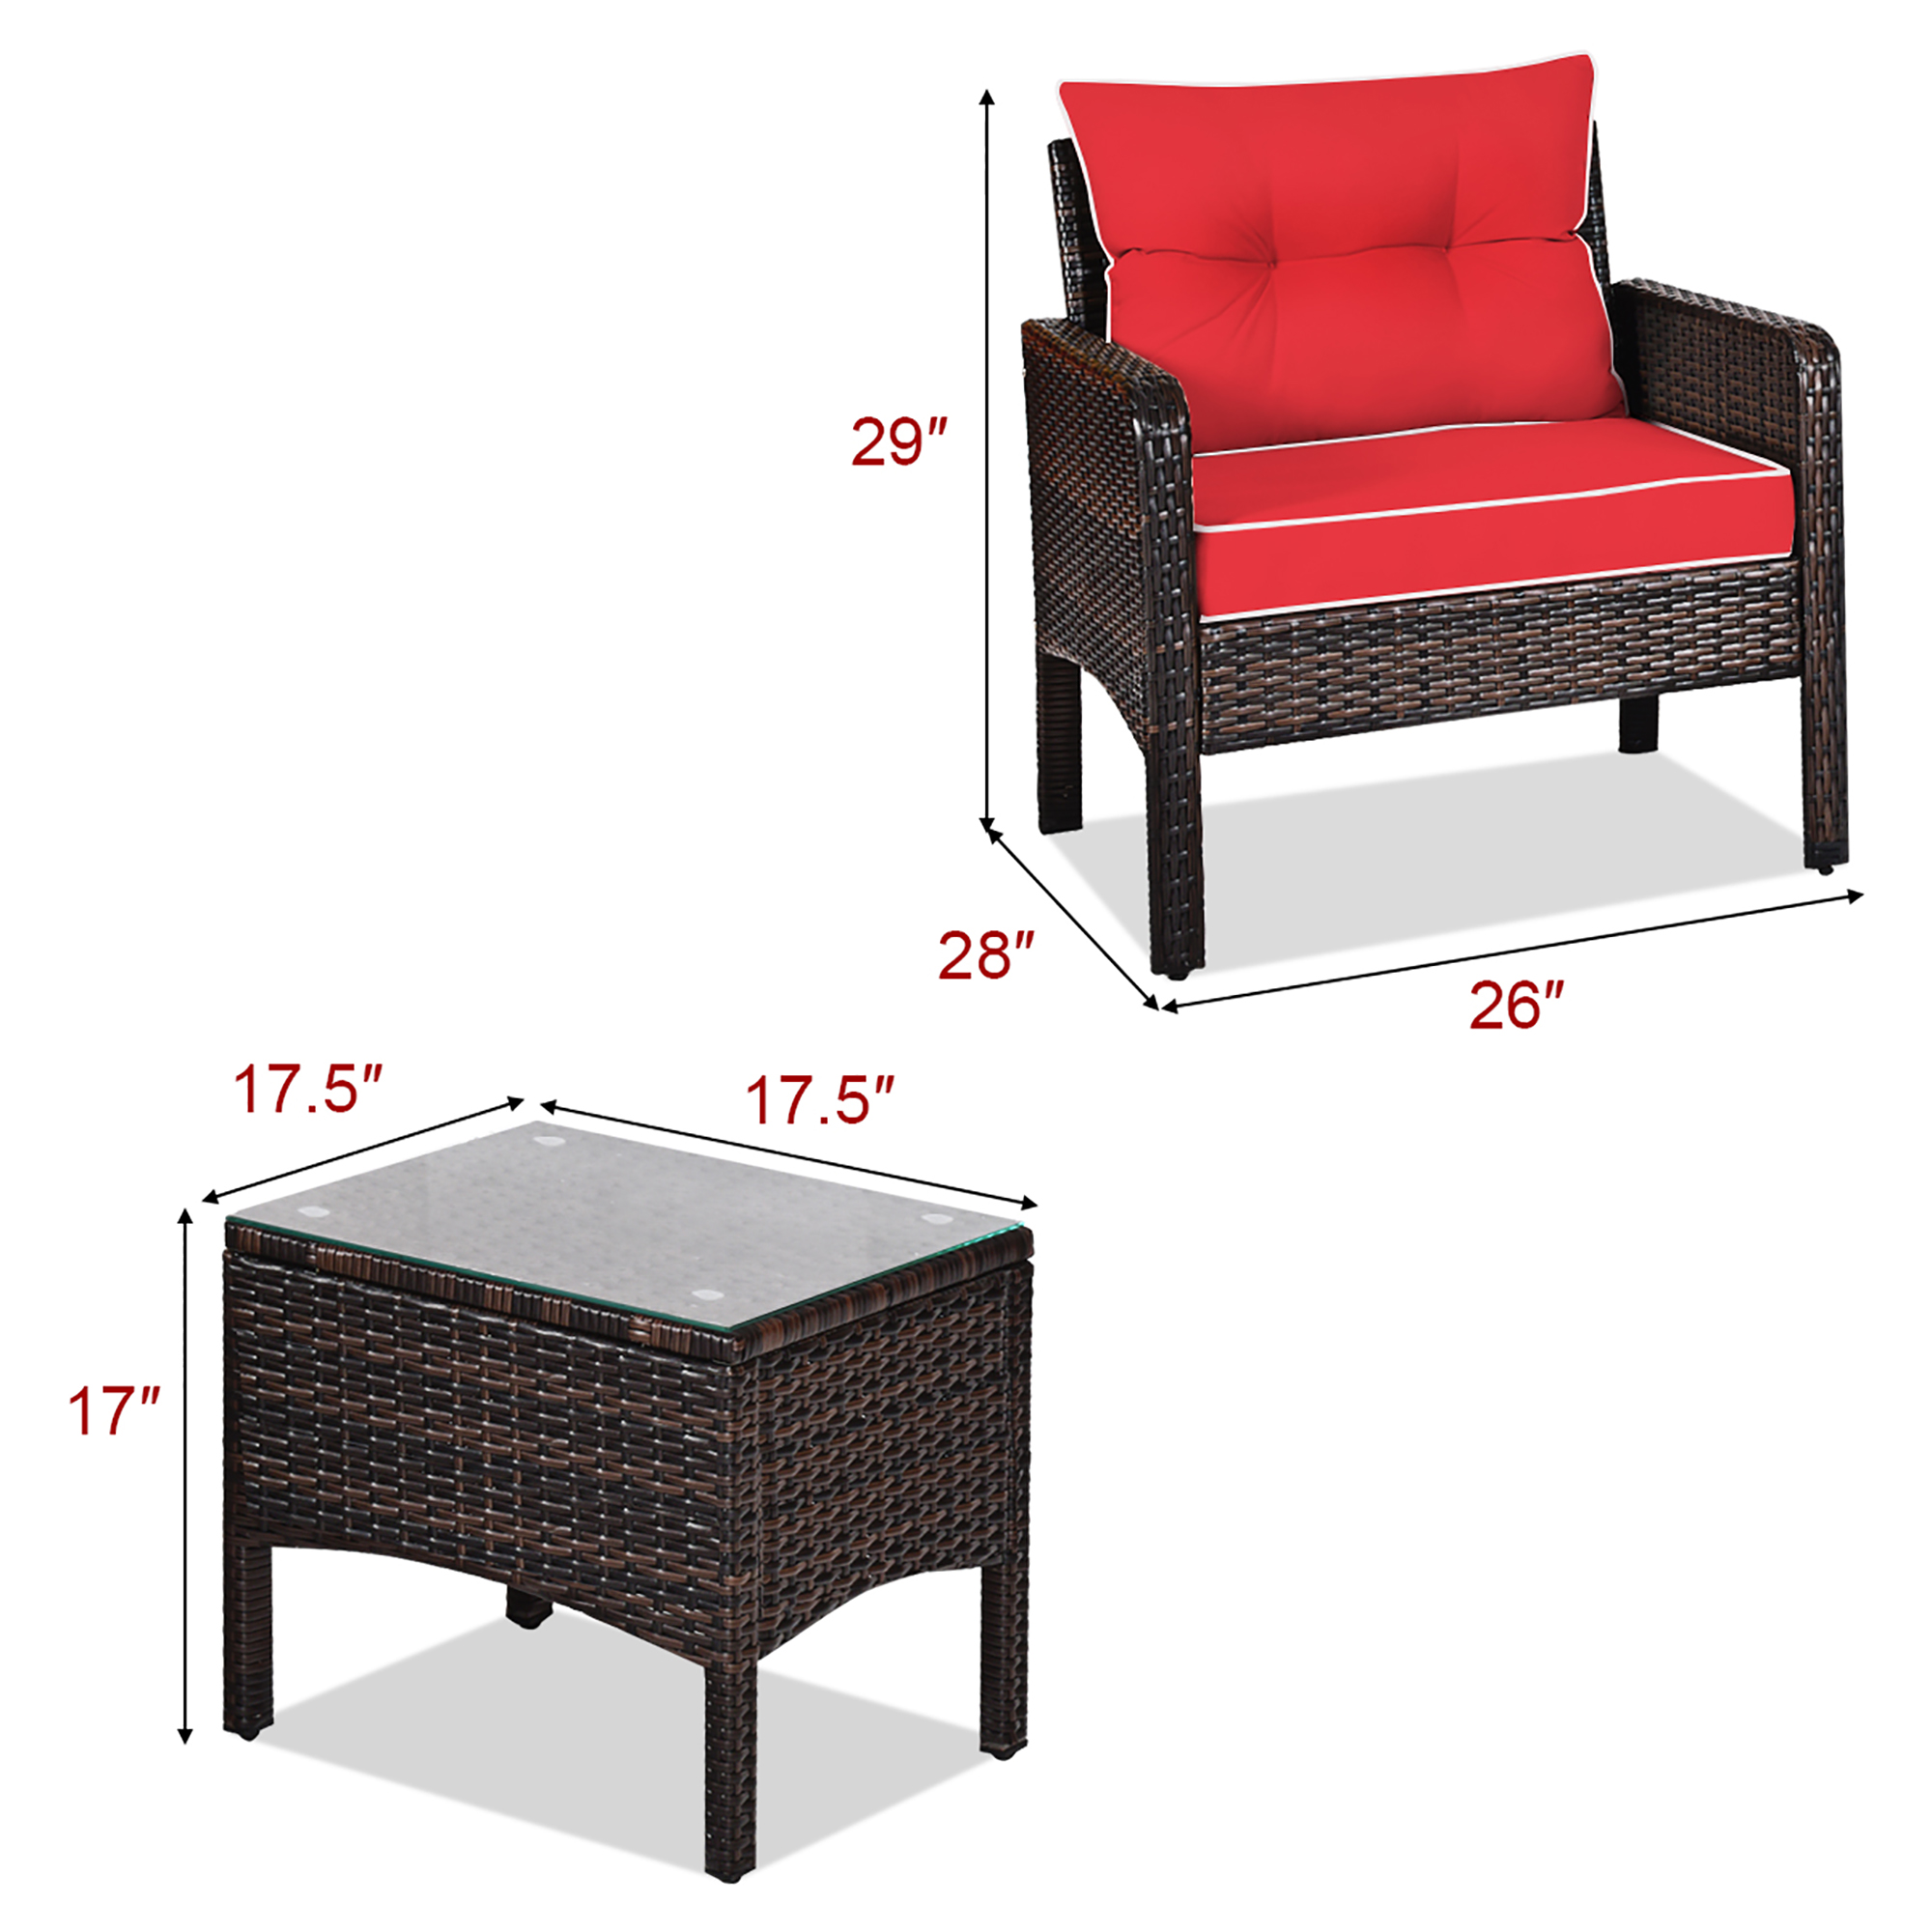 Costway 3PCS Outdoor Rattan Conversation Set Patio Furniture Cushioned Sofa Chair Red - image 3 of 9